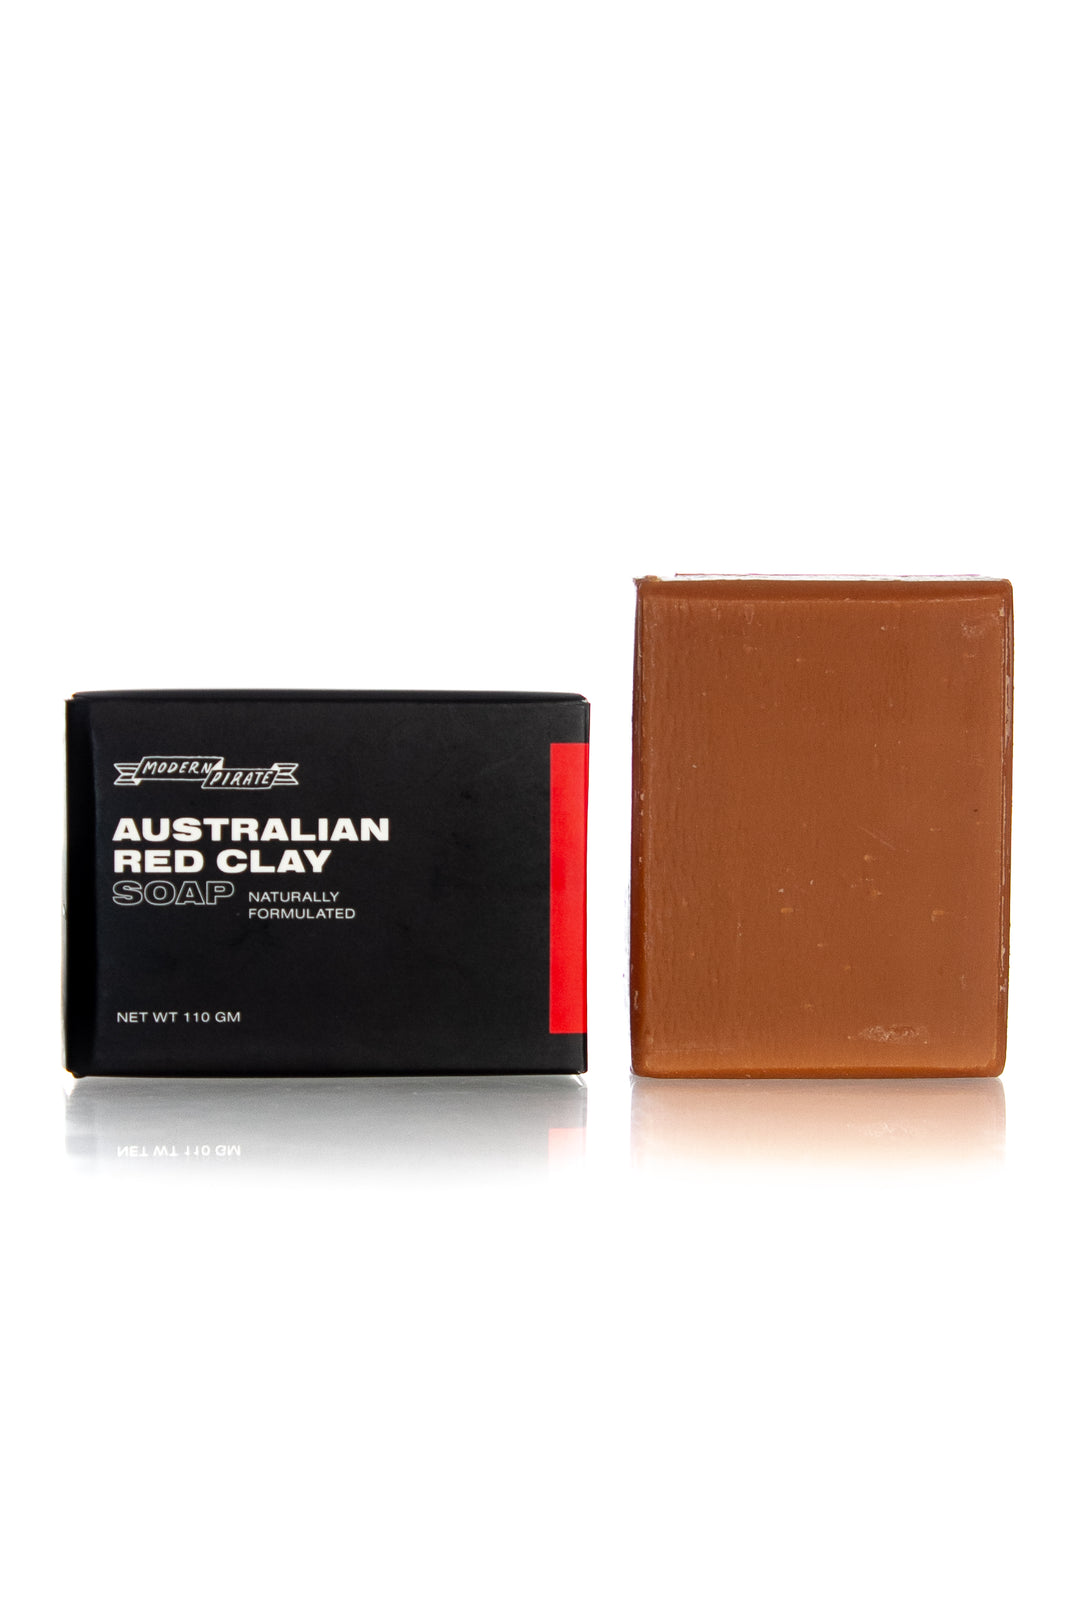 MODERN PIRATE LOST SOUL AUSTRALIAN RED CLAY SOAP 110G